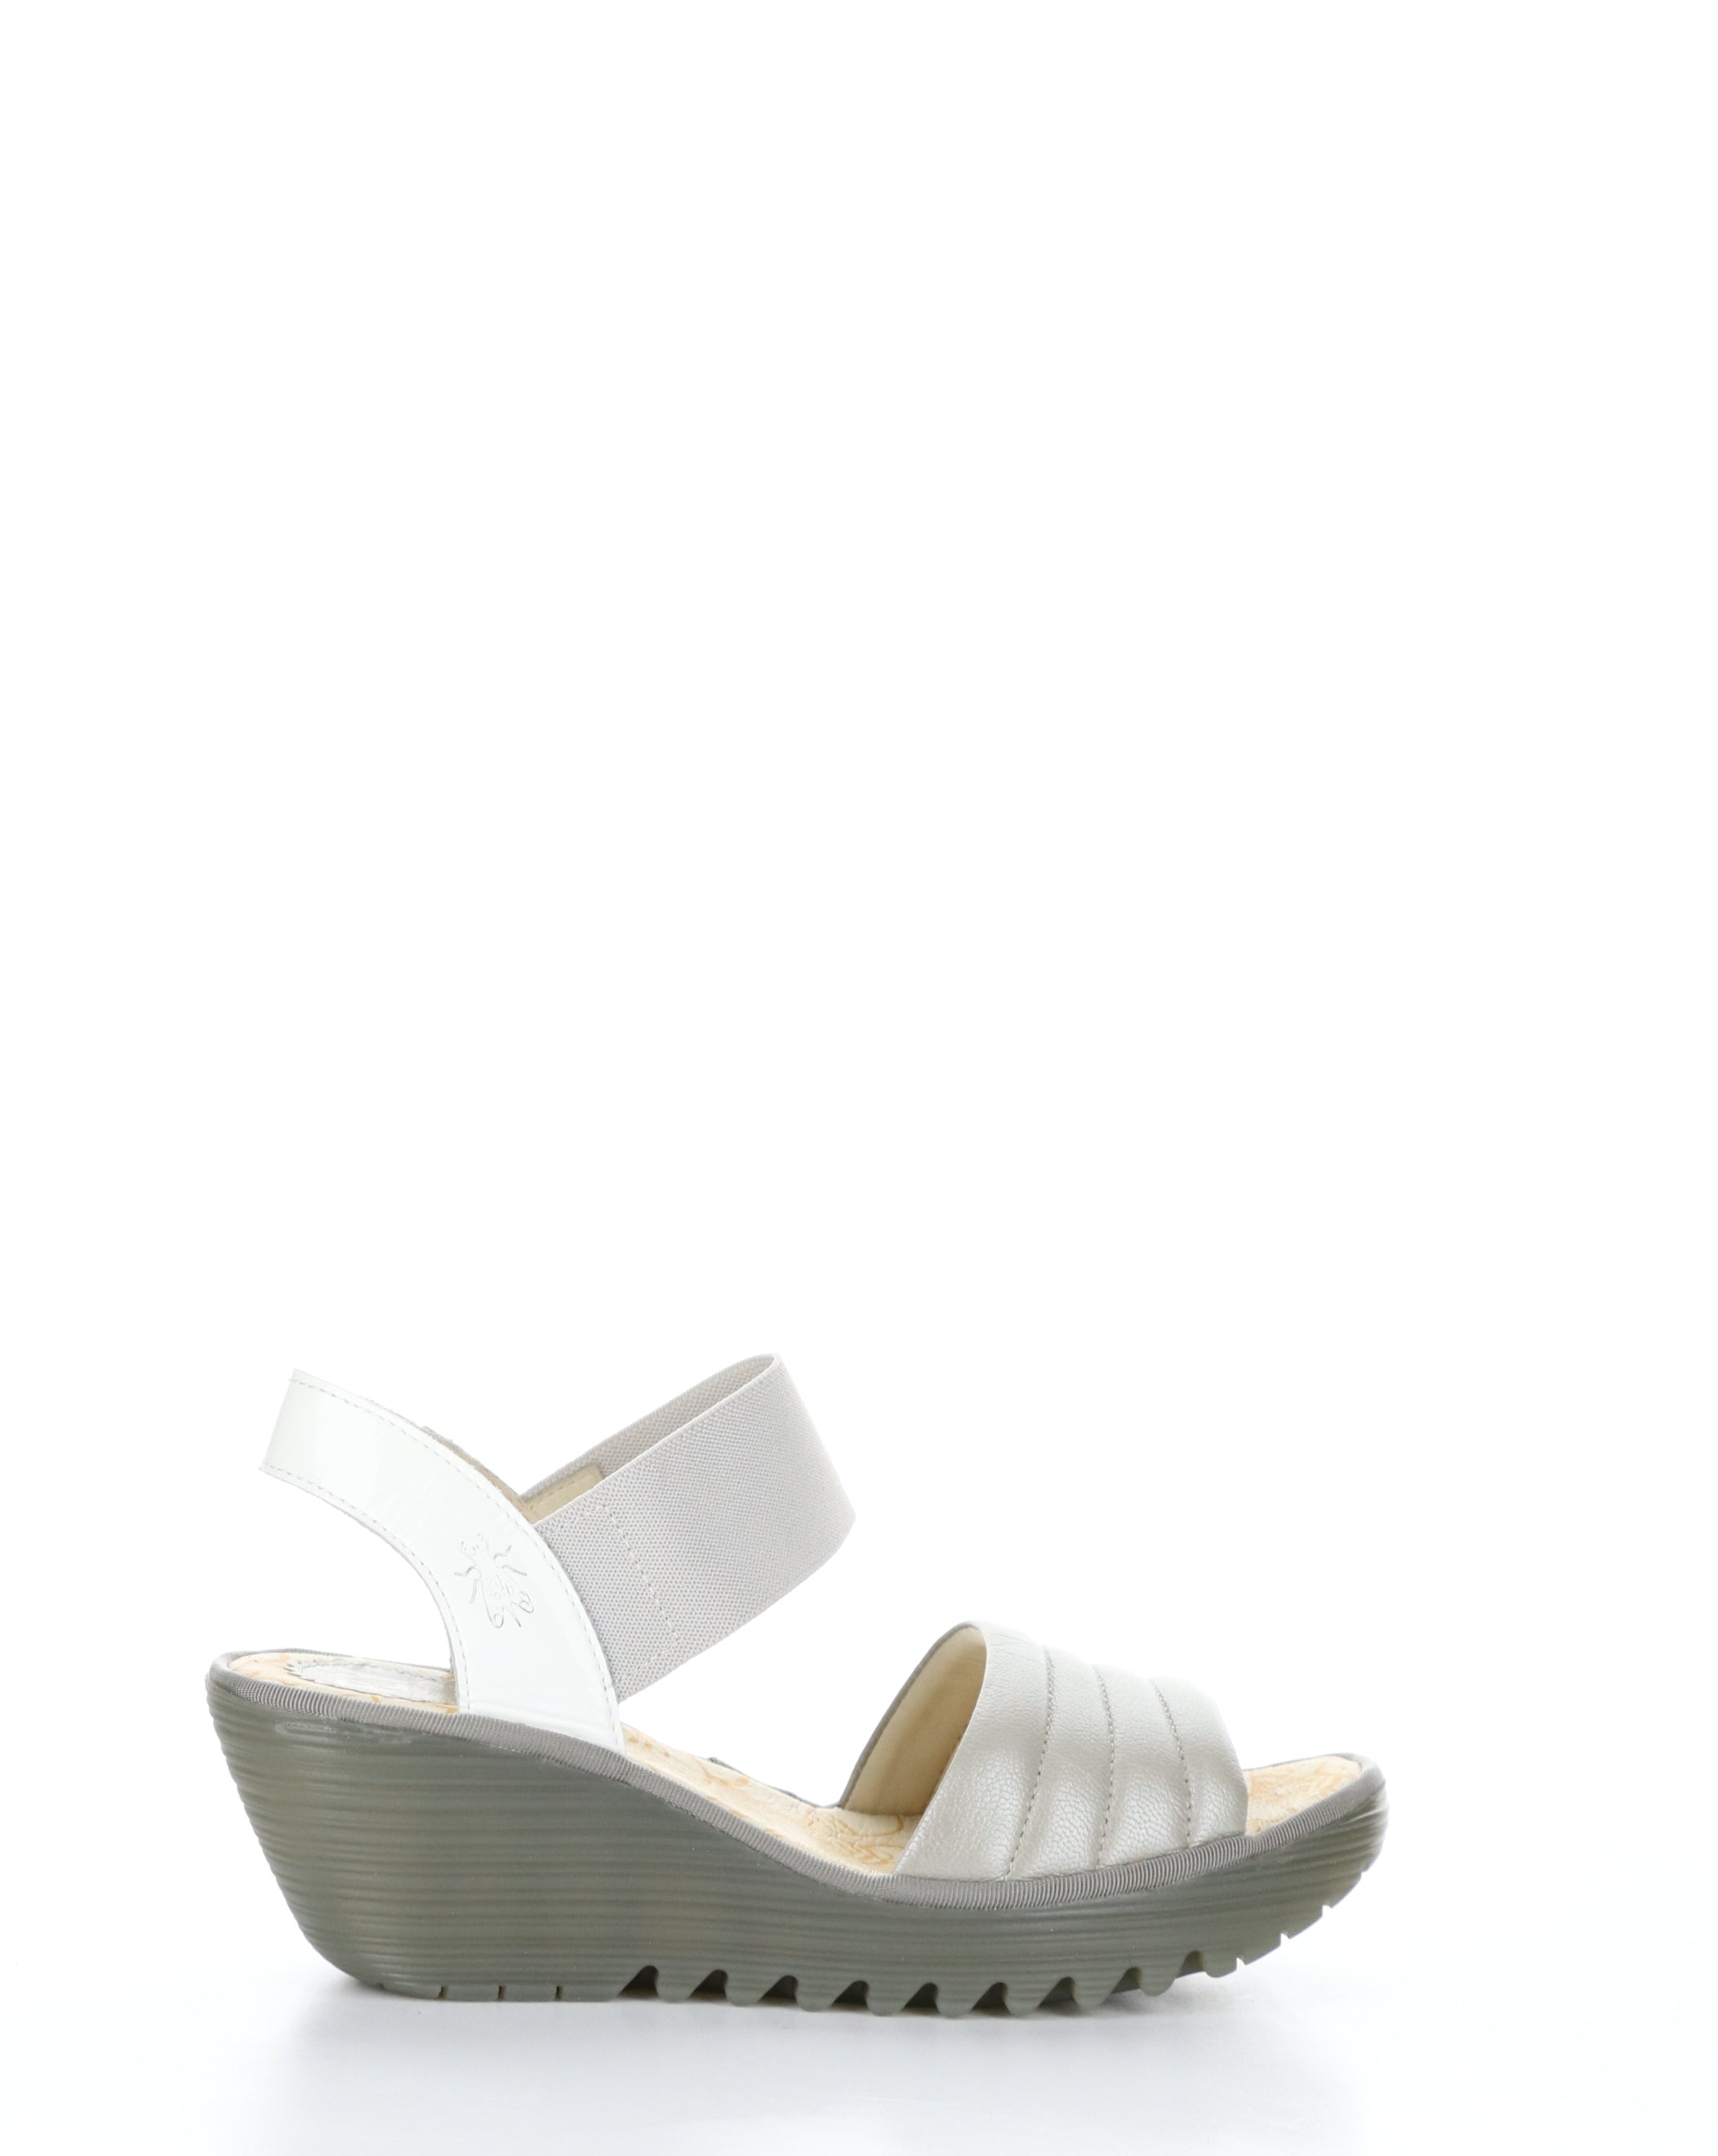 Fly London Yiko Silver/Off White Leather Wedge Sandal P501414 001